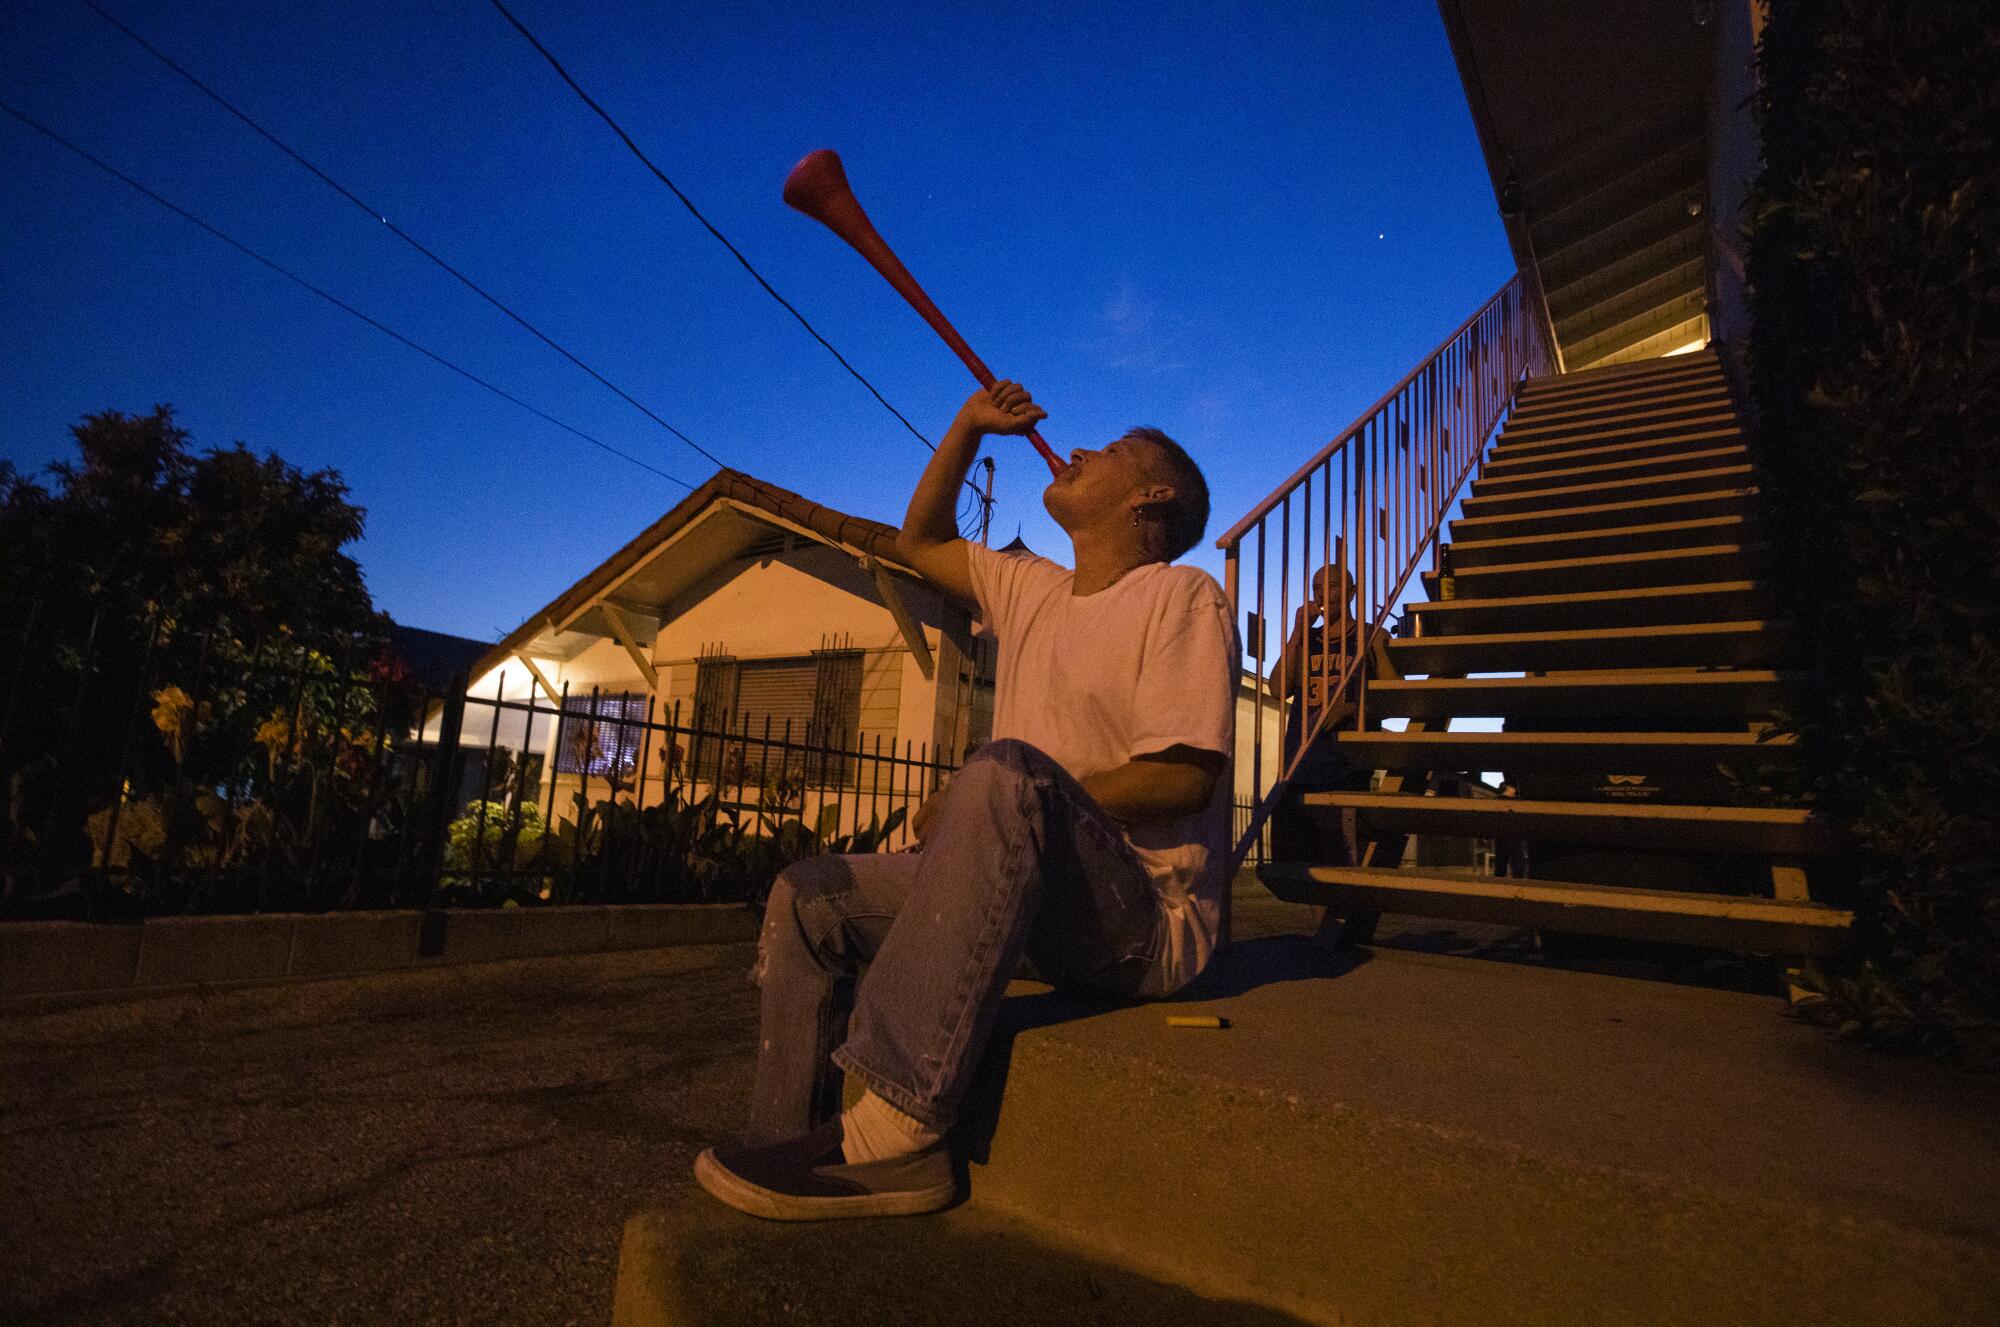 Booka Bickar, 59, makes noise with a plastic horn outside a friend's apartment on Lucile Ave. in Silver Lake, drawing attention to thank essential workers and all the people on the front lines against the coronavirus. Every night for about 5 minutes, starting at 8pm sharp, he and other people on the block and the surrounding area make noise thanking workers.